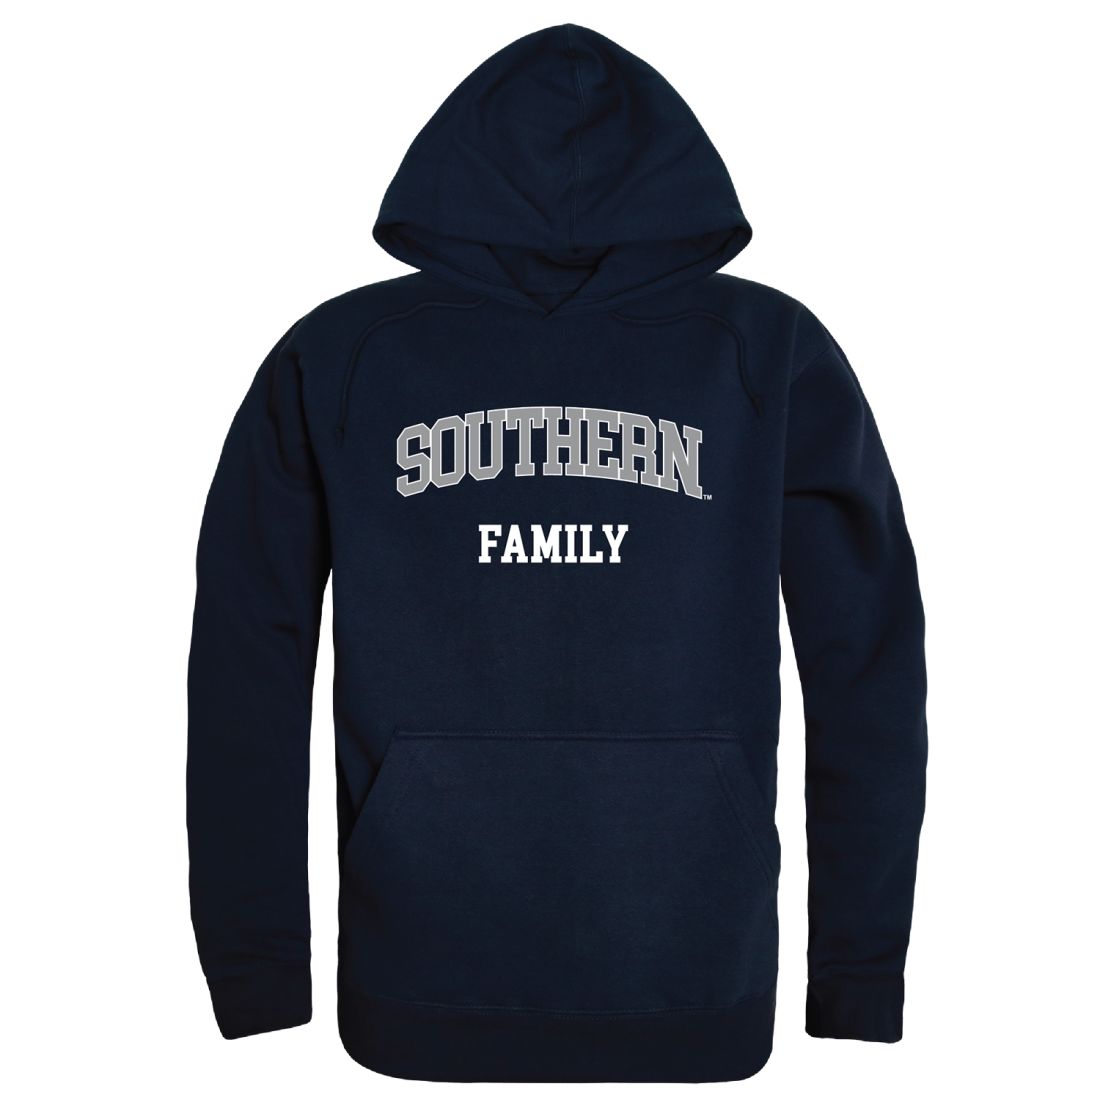 Southern Connecticut State University Owls Family Hoodie Sweatshirts